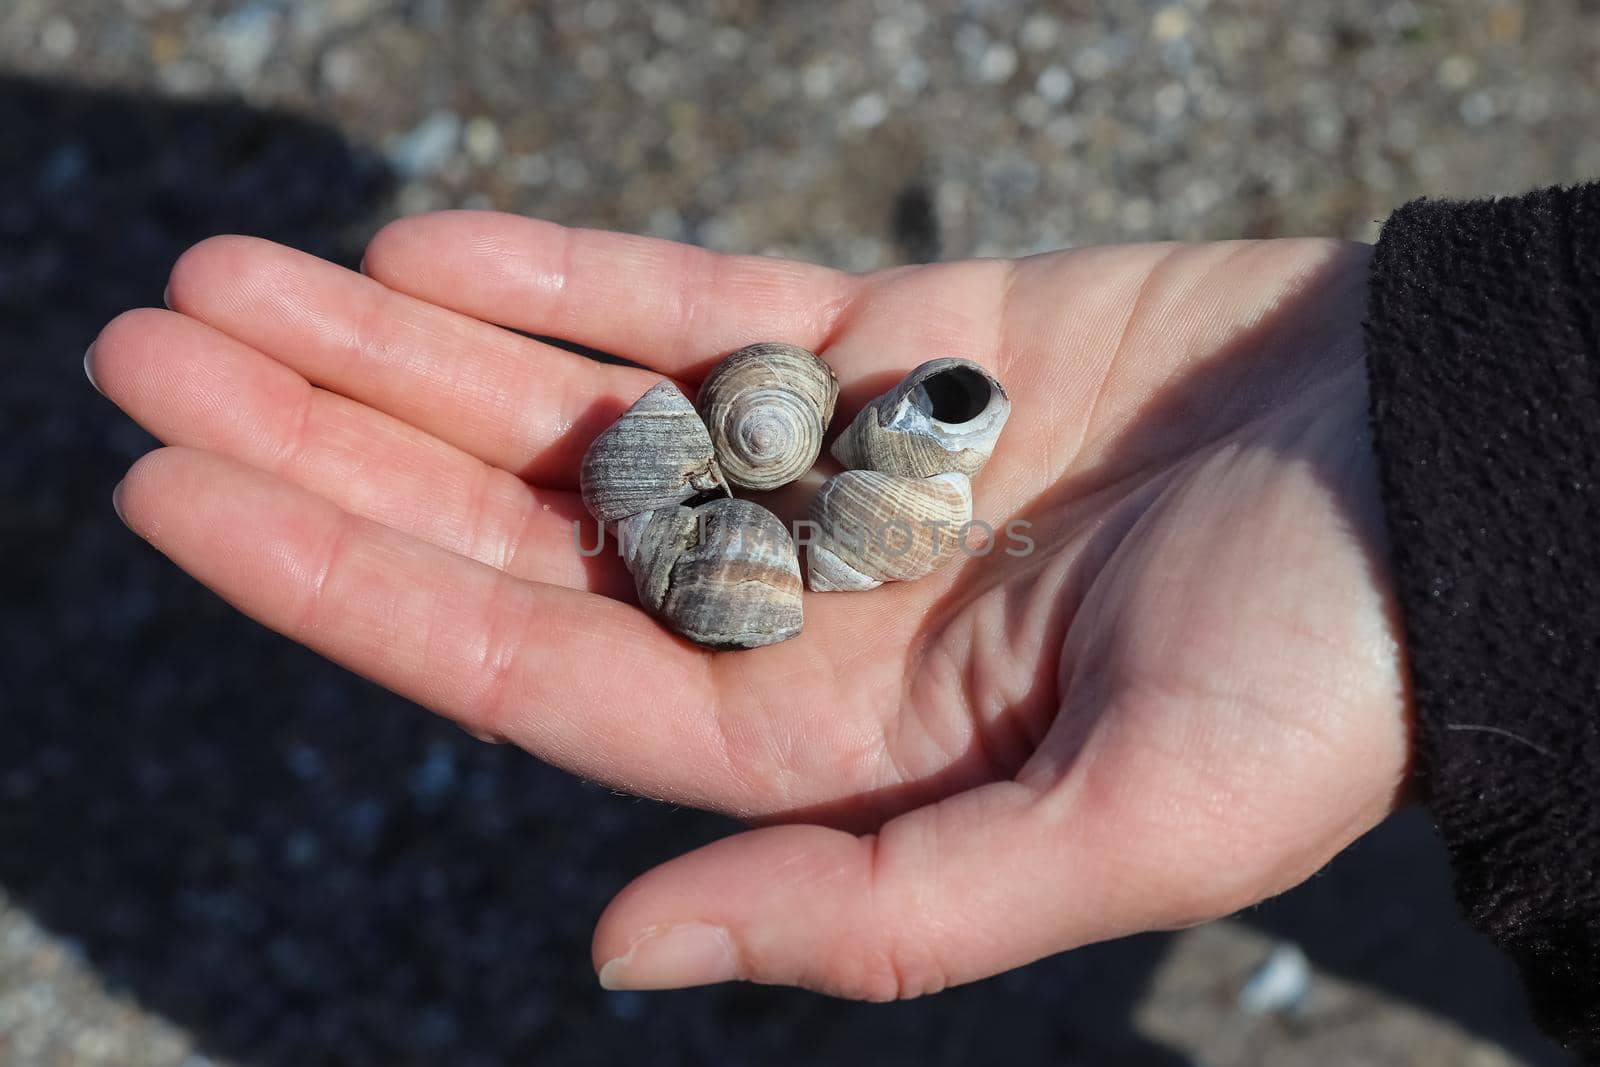 Several snail shells in an open female hand